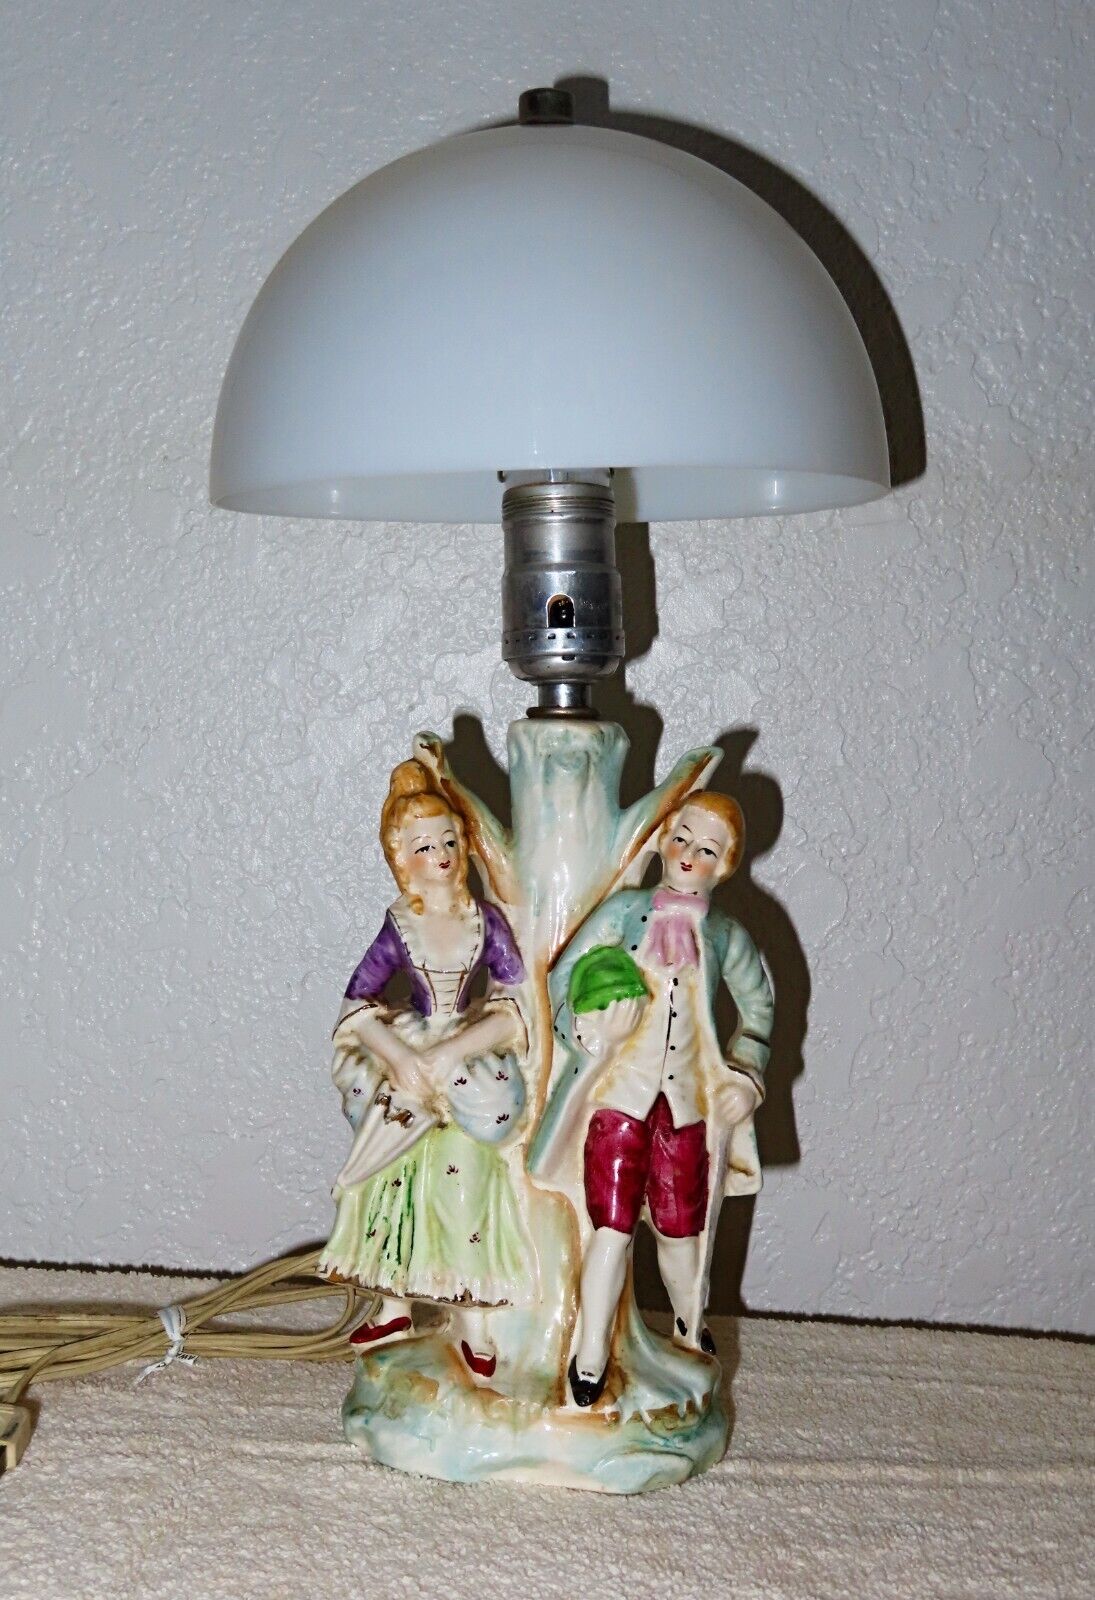 Vintage Wales Pottery Victorian Figurines Lamp